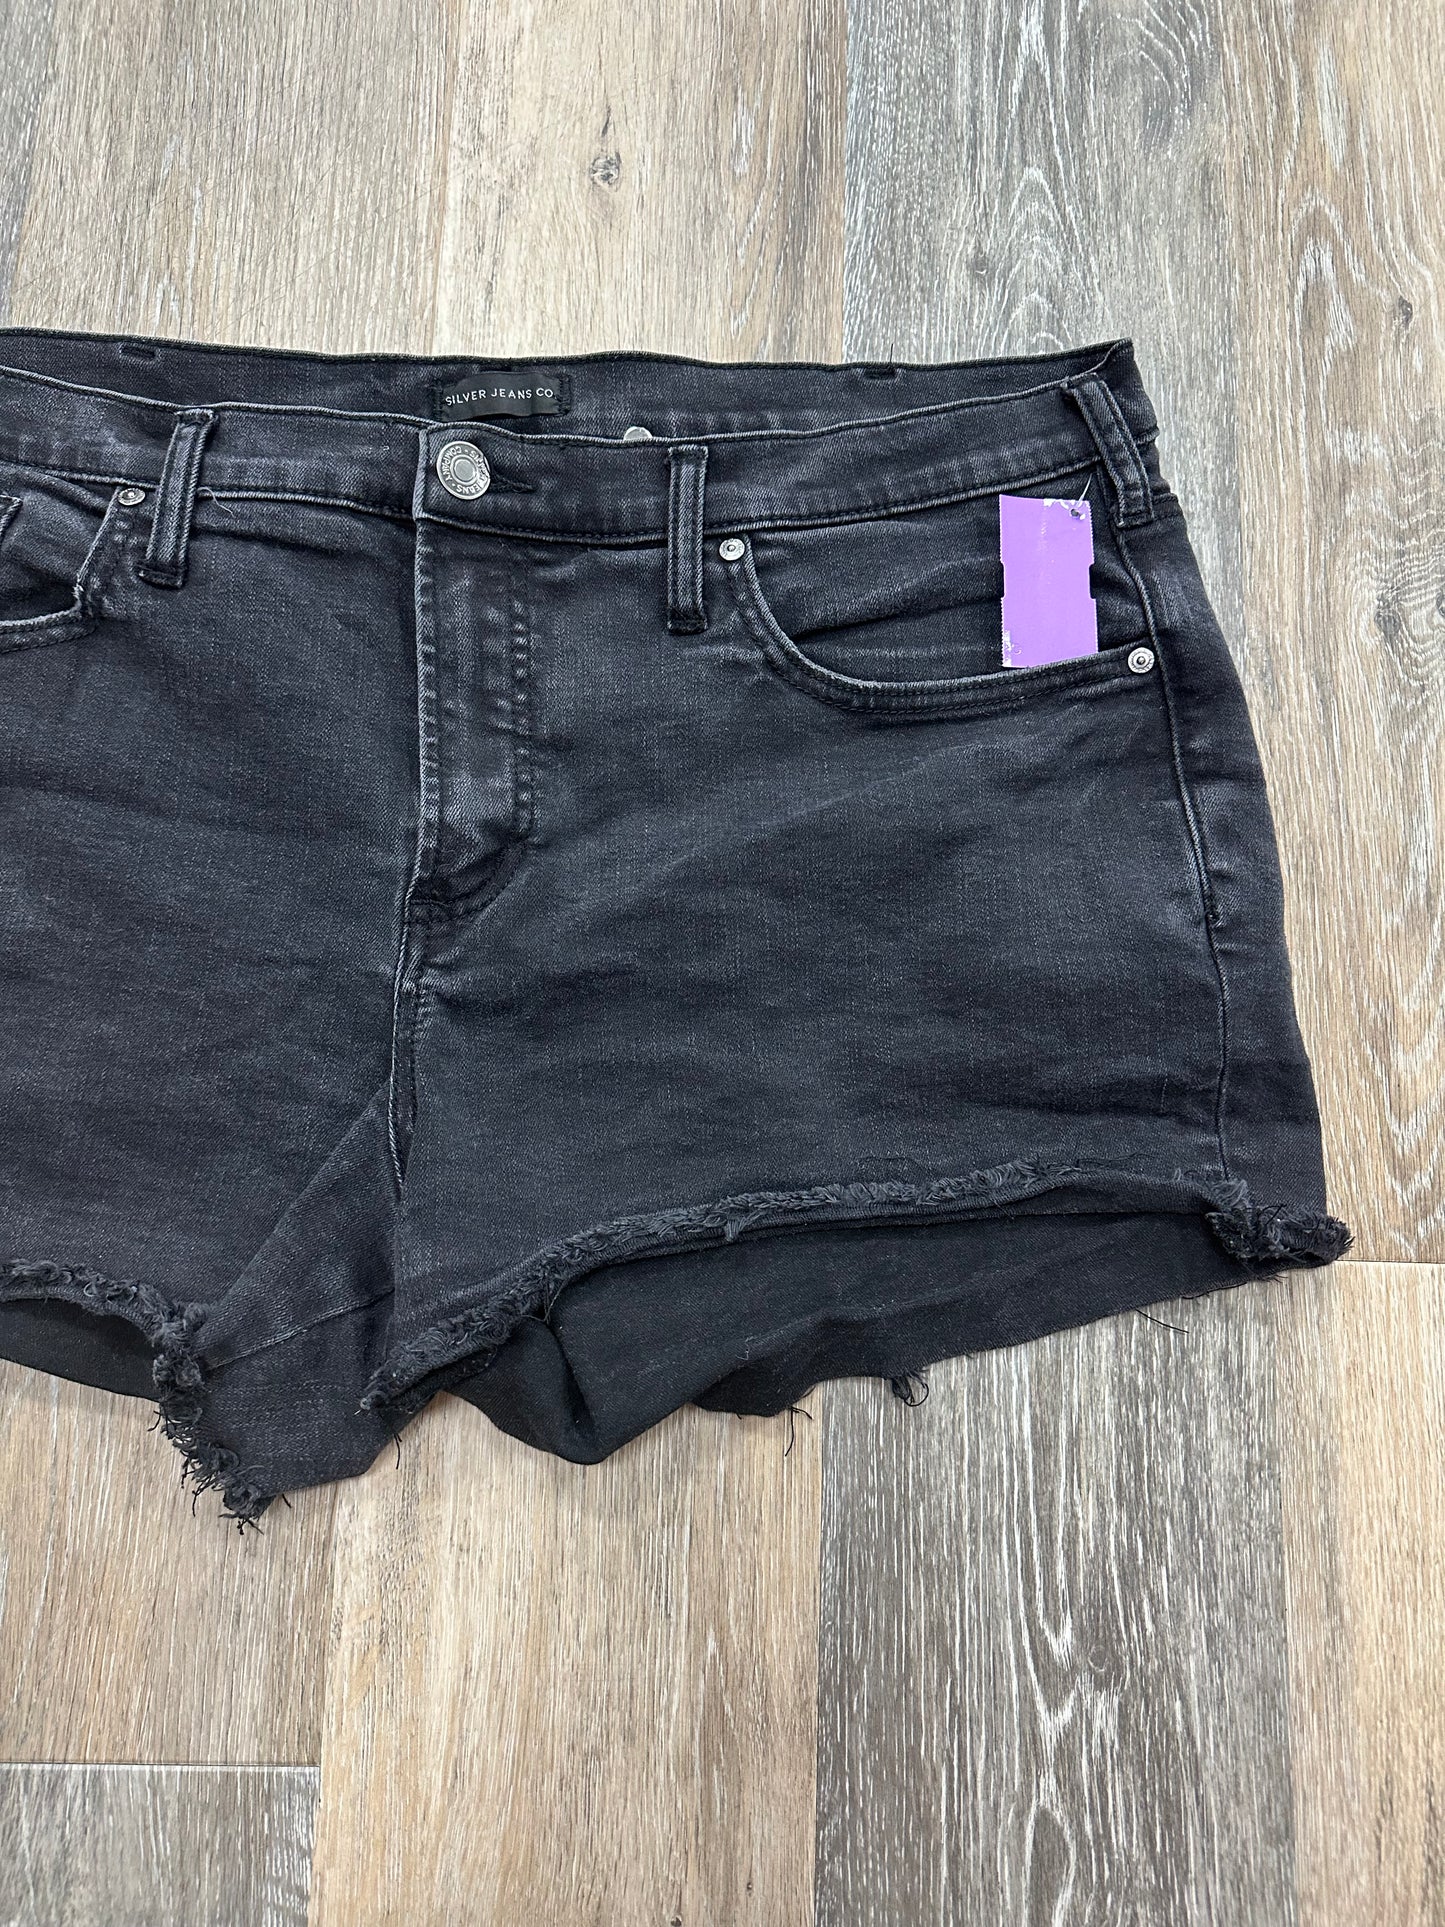 Shorts By Silver  Size: 18